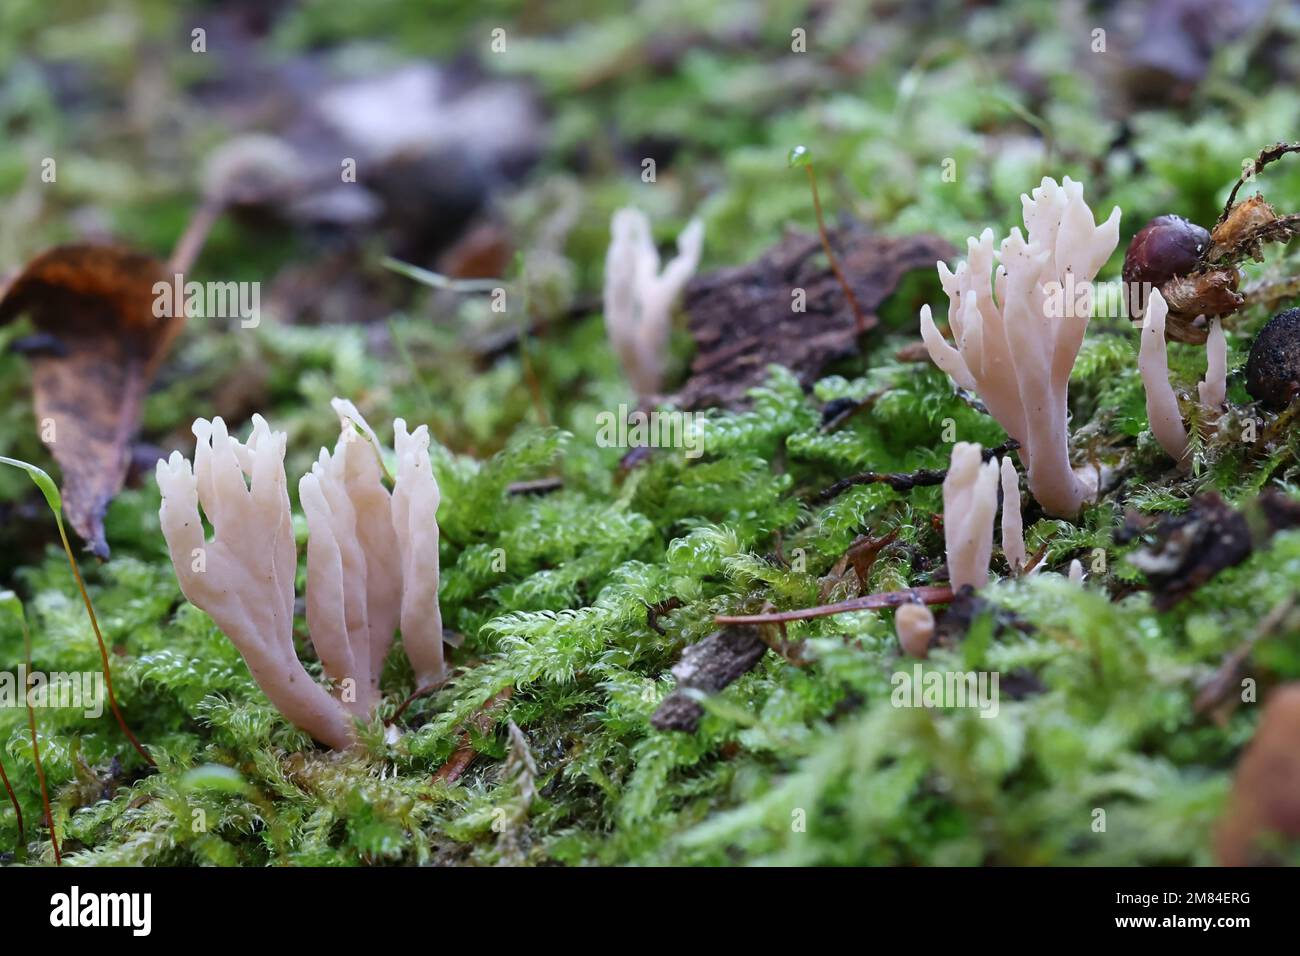 Lentaria byssiseda, a coral fungus growing on oak trunk, no common English name Stock Photo